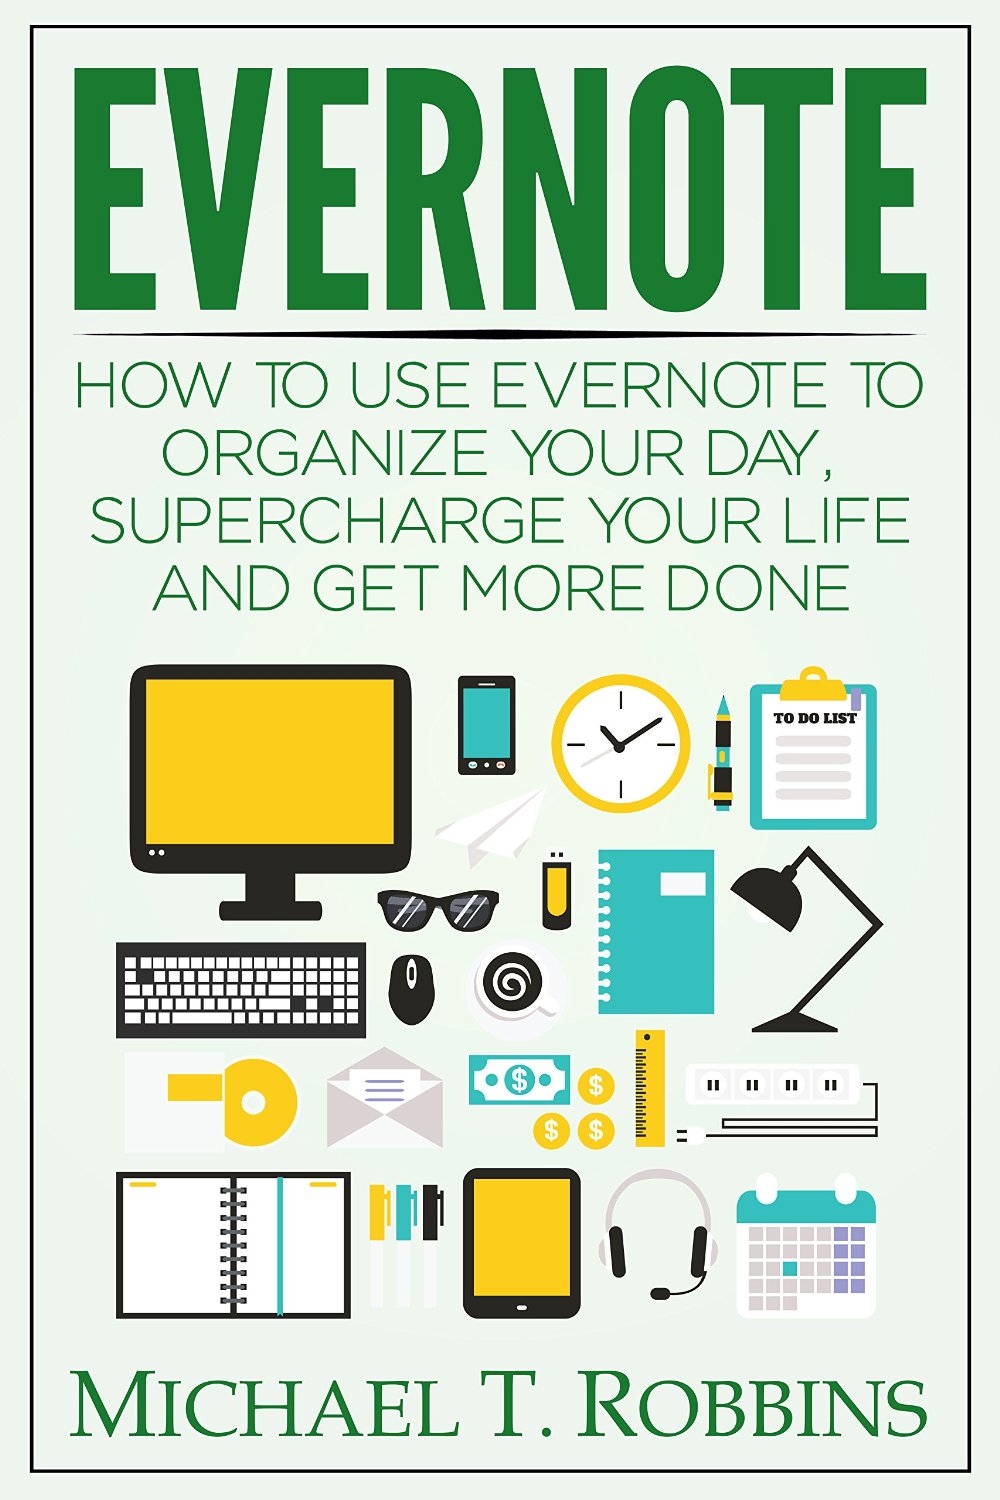 FREE: Evernote: How to Use Evernote to Organize Your Day, Supercharge Your Life and Get More Done by Michael T. Robbins